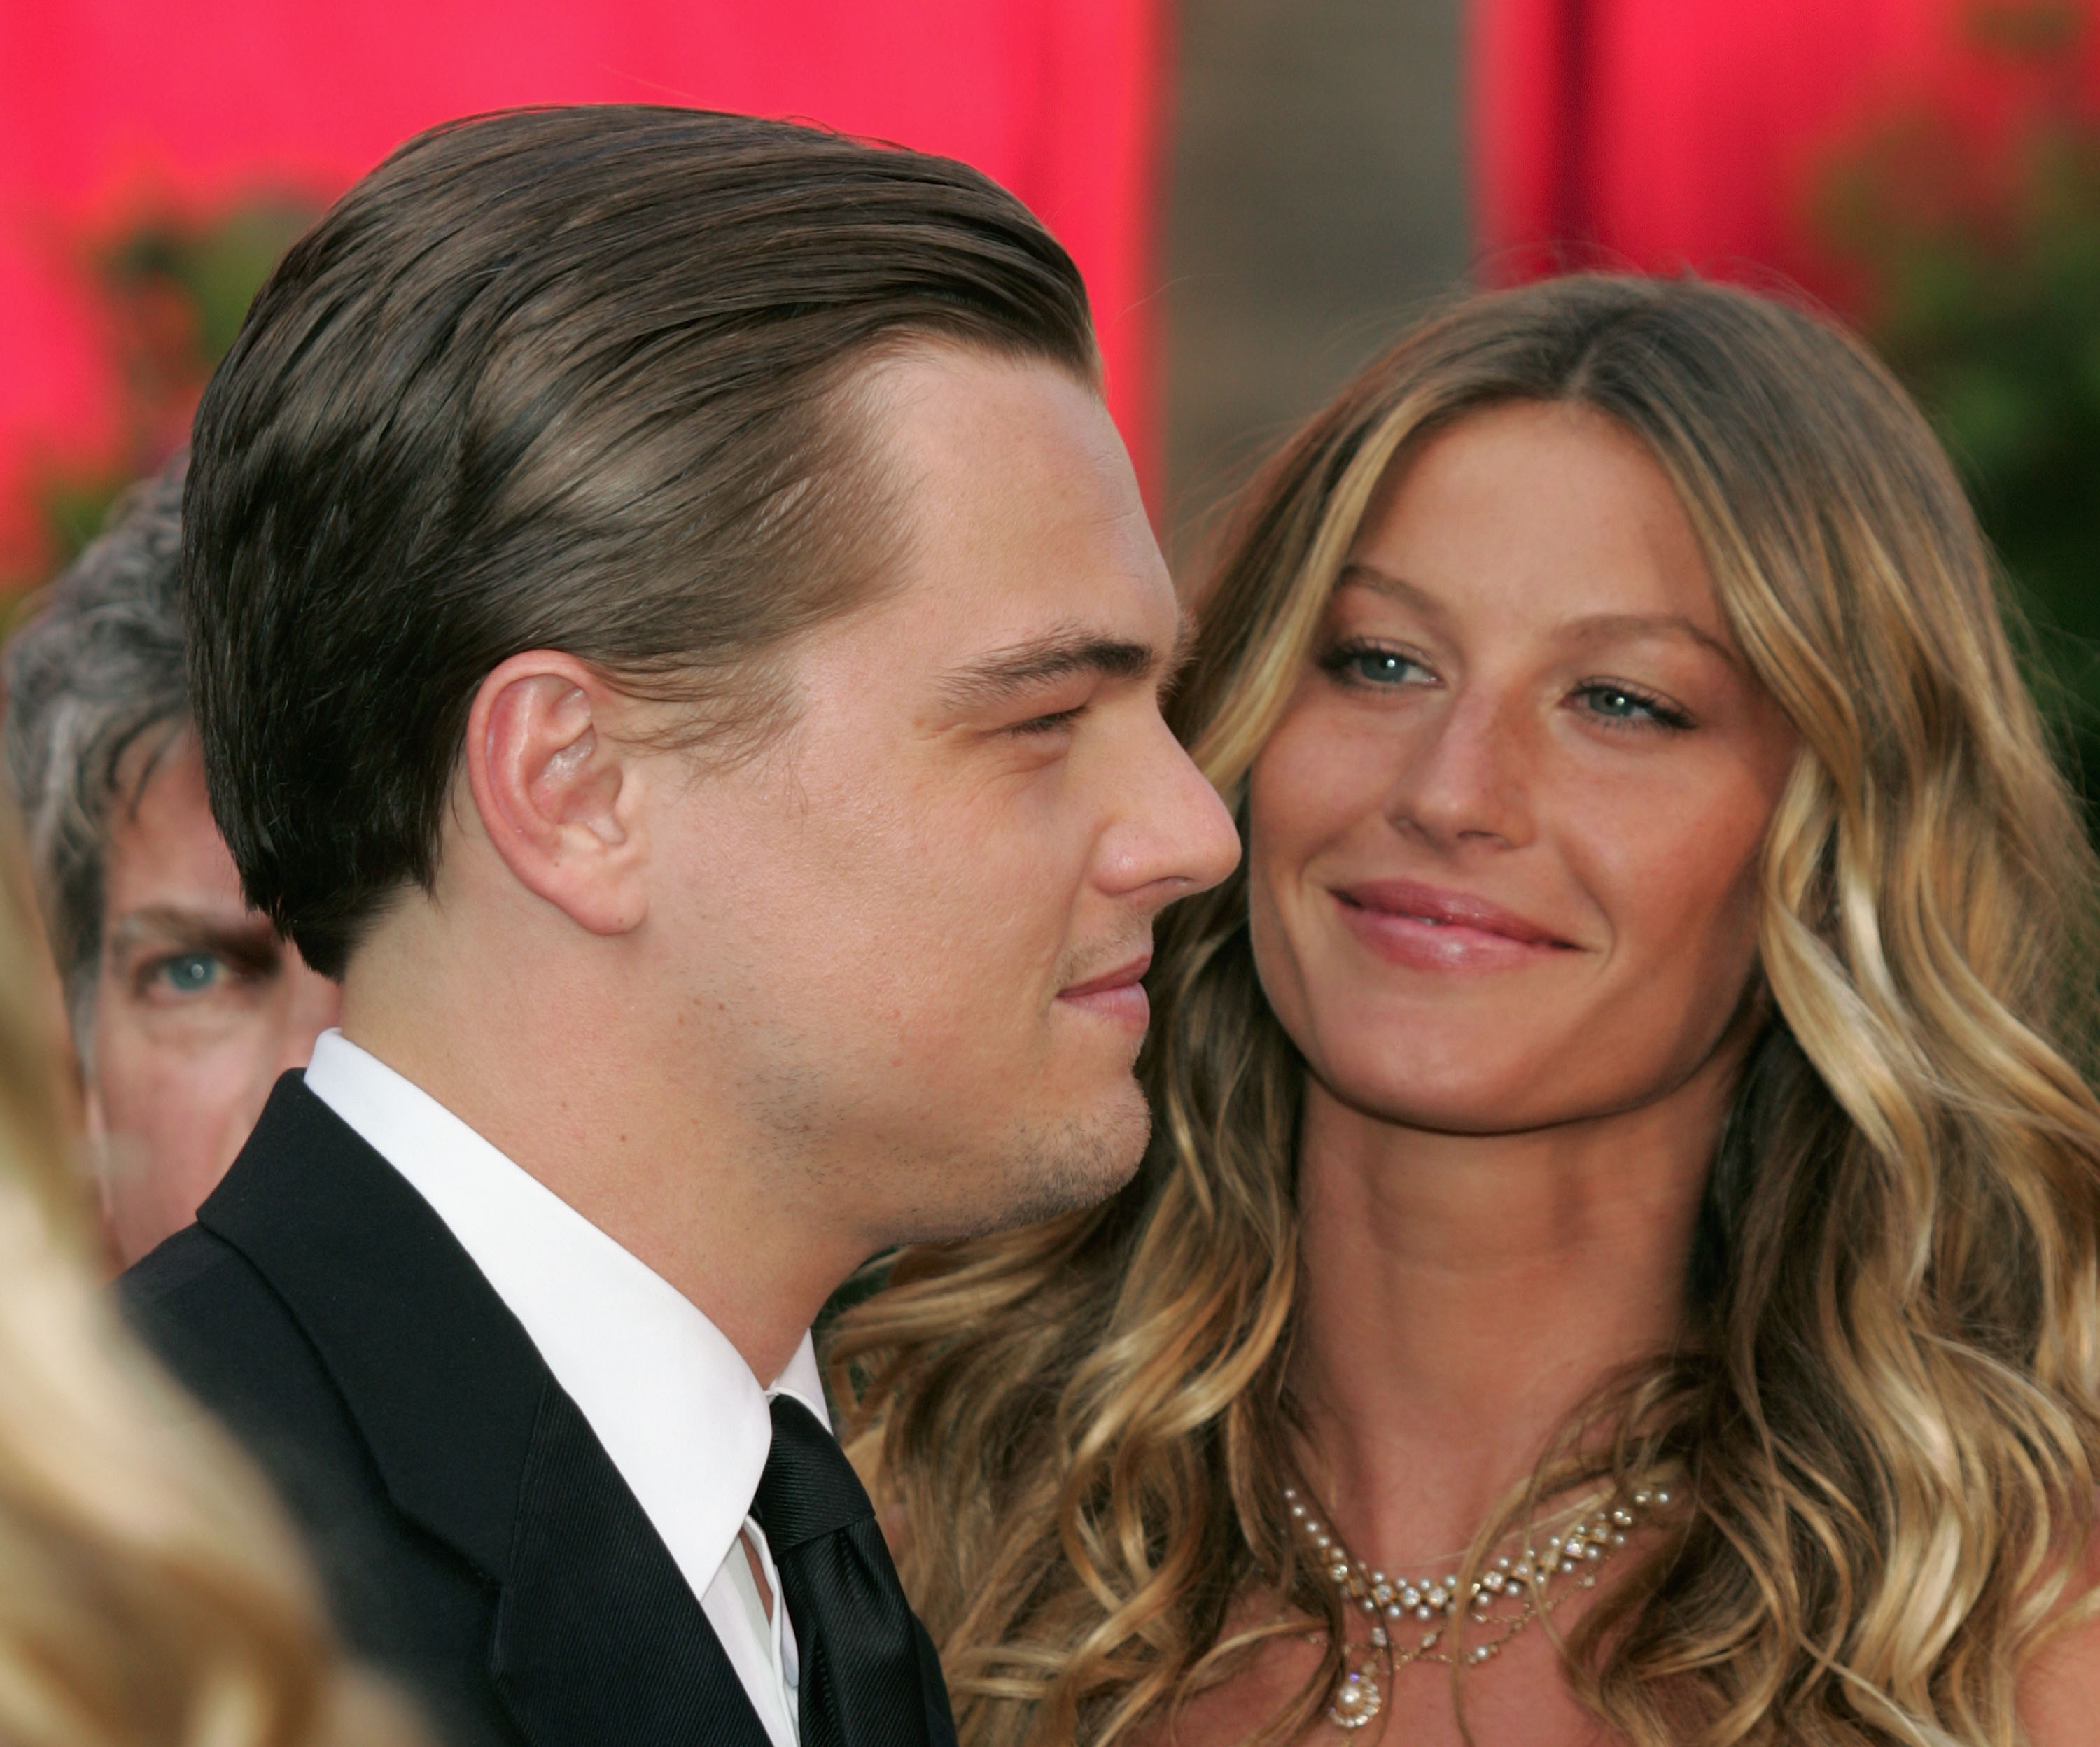 The best memes about Leonardo DiCaprio's dating habits - cover